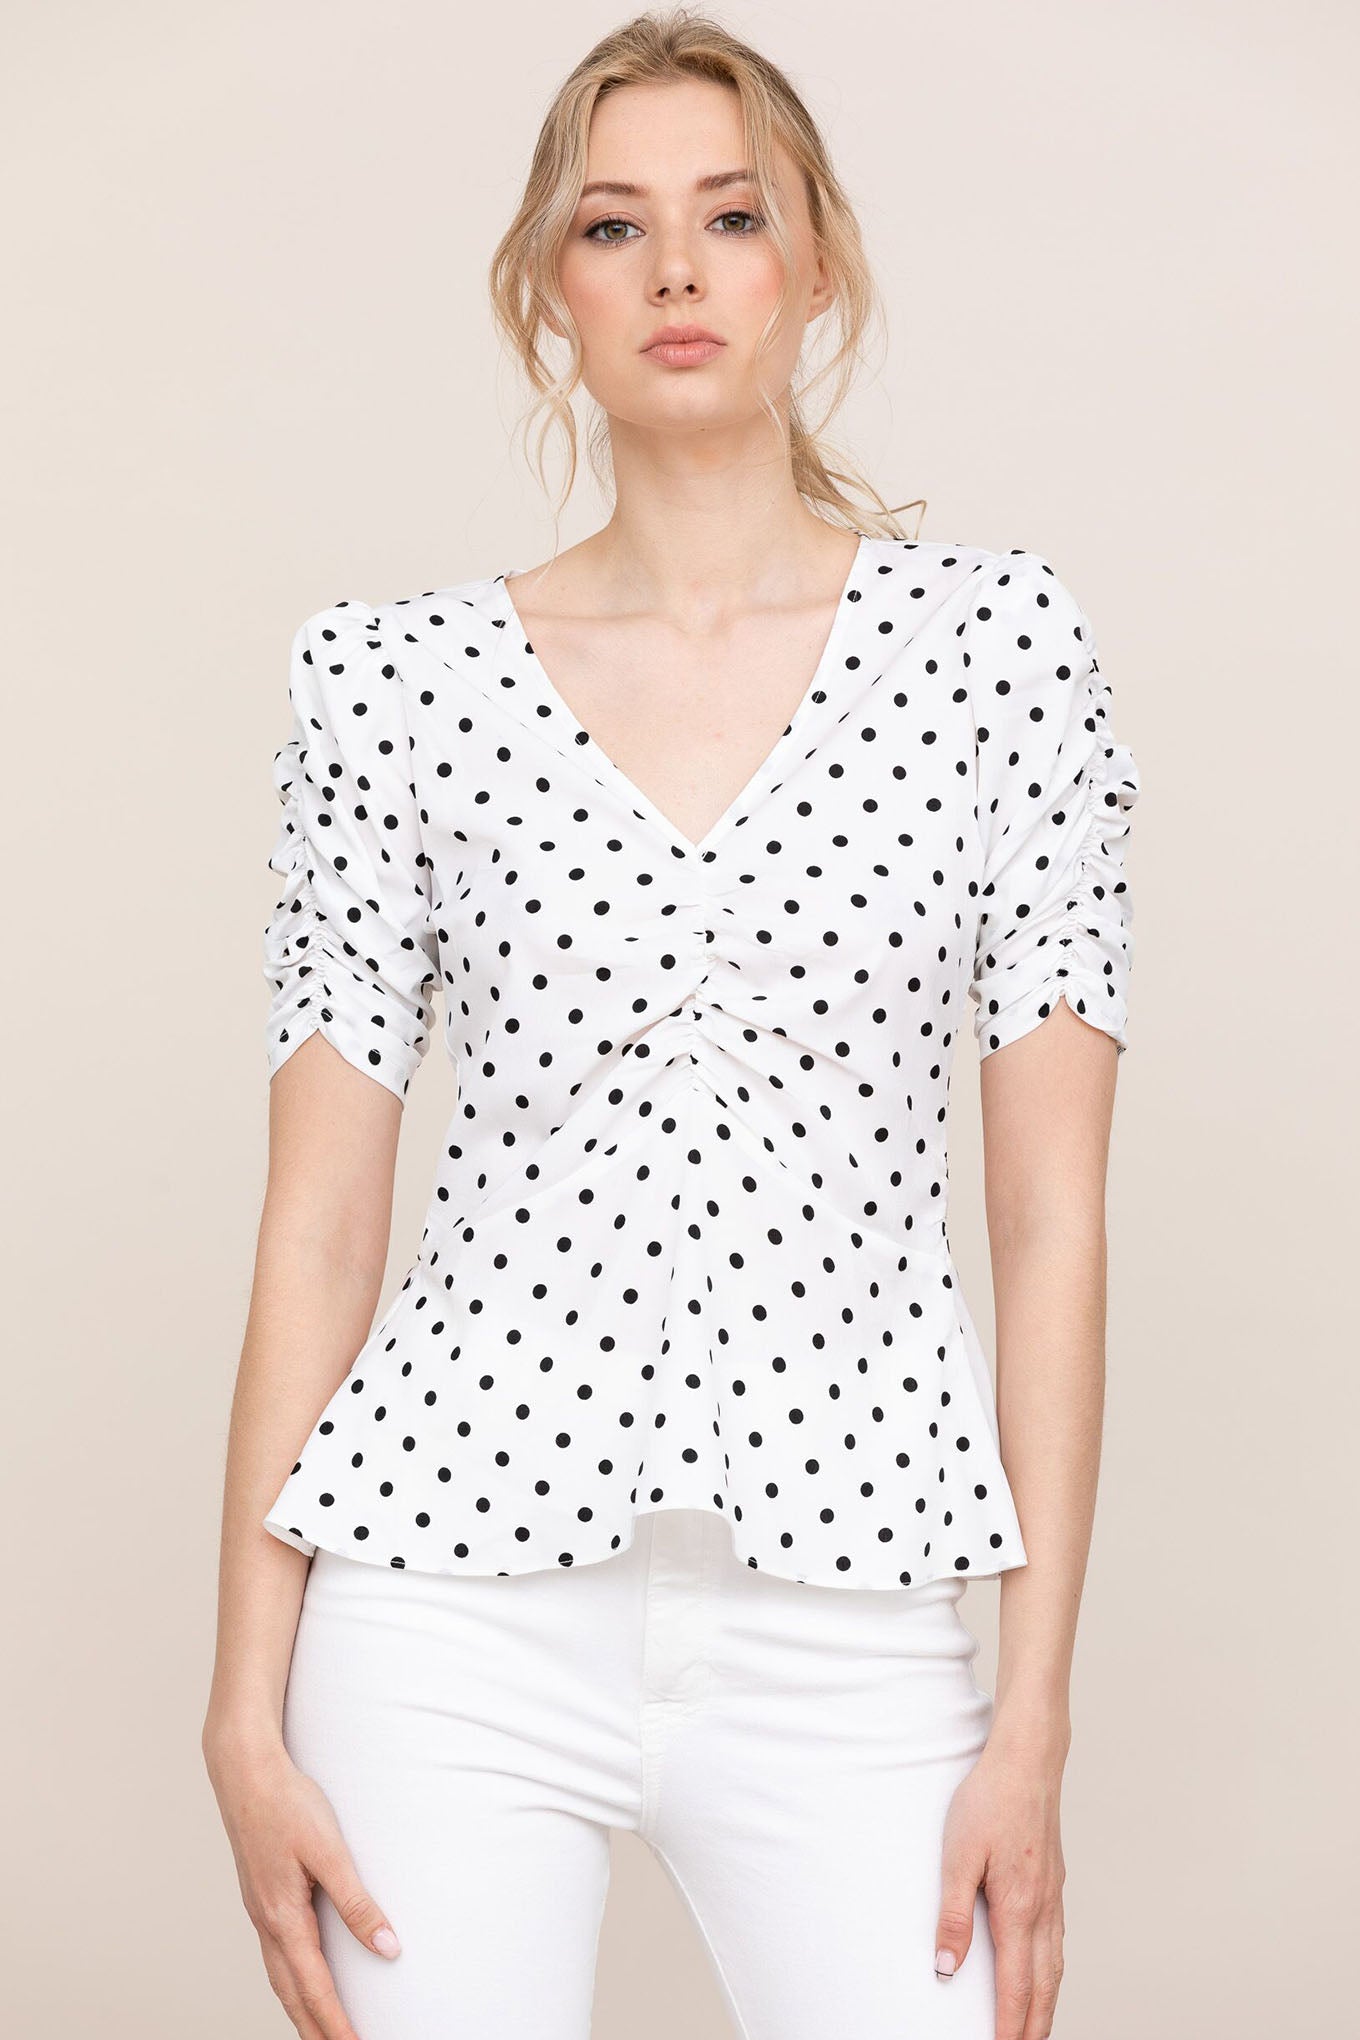 After Hours Top | White Polka Dot Top – Yumikim